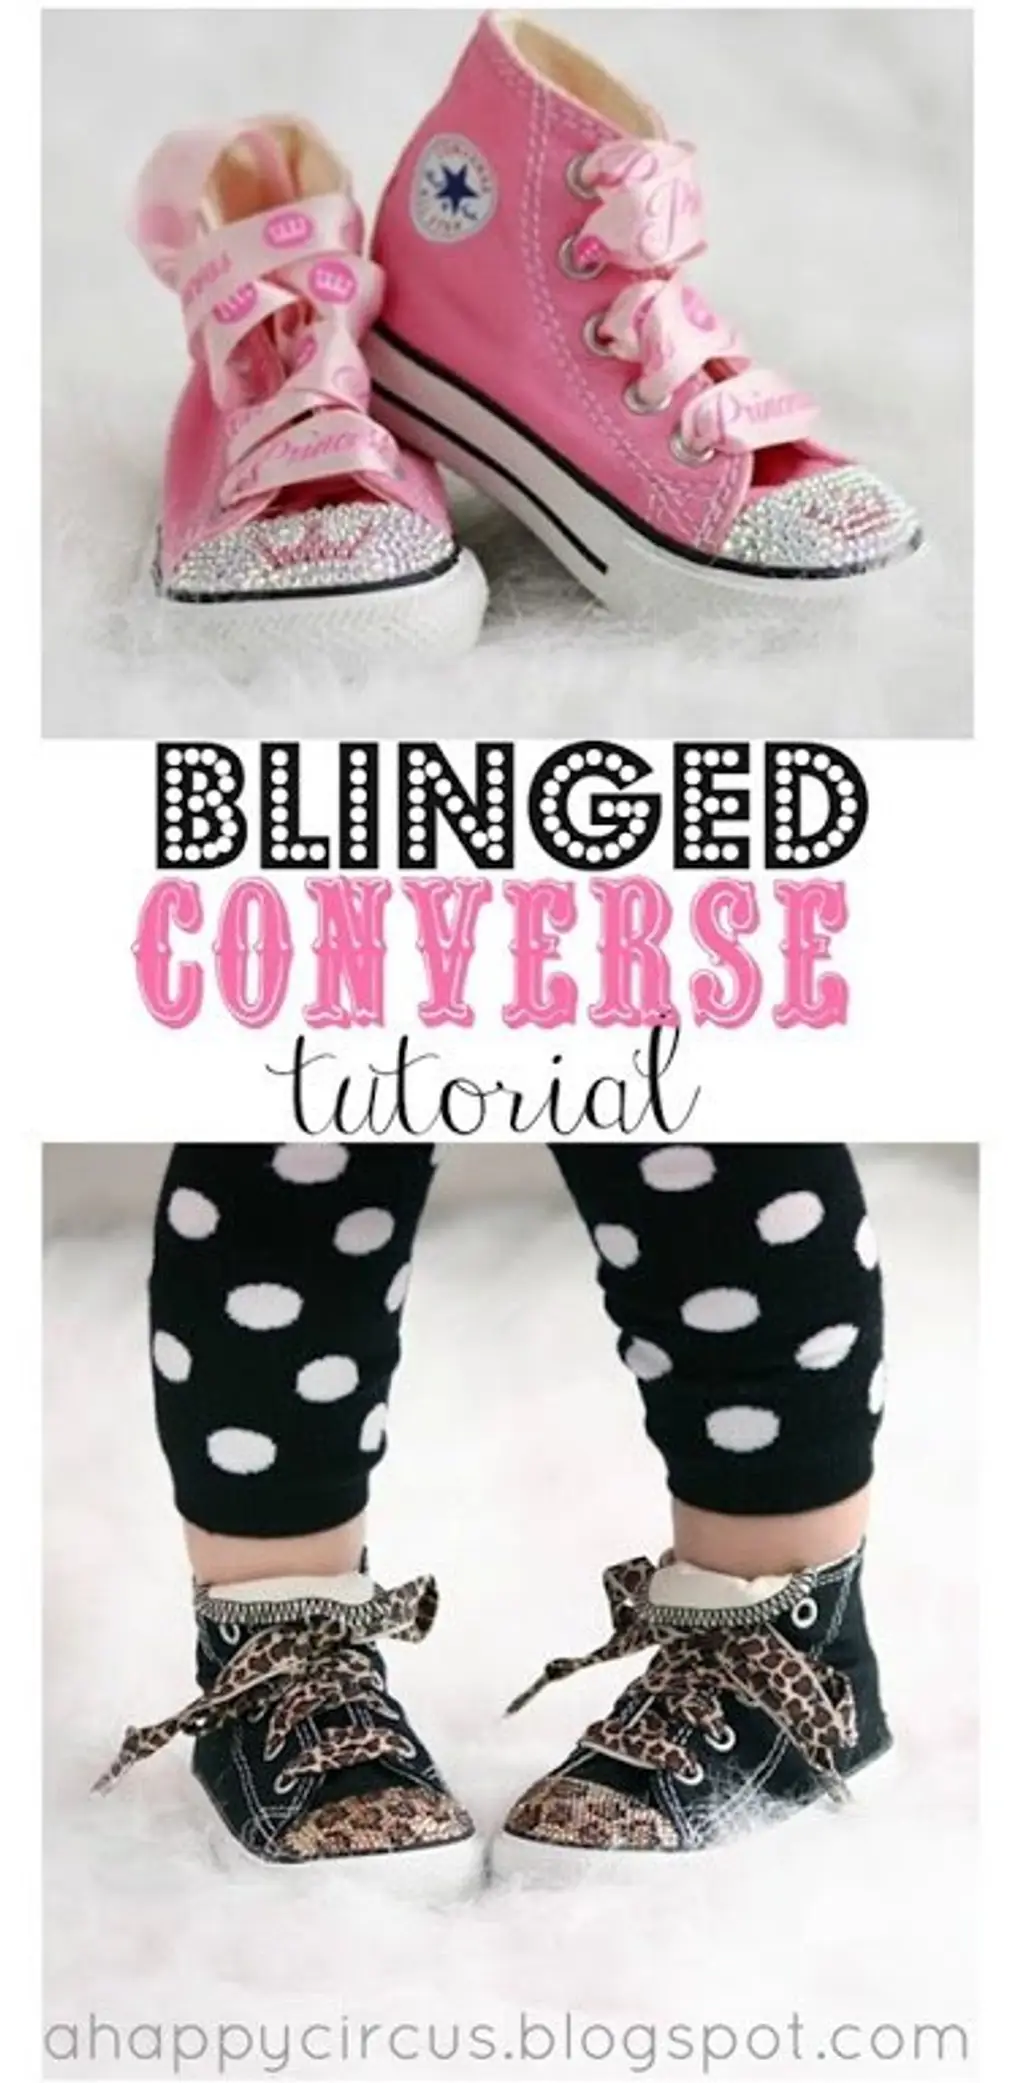 Blinged Converse